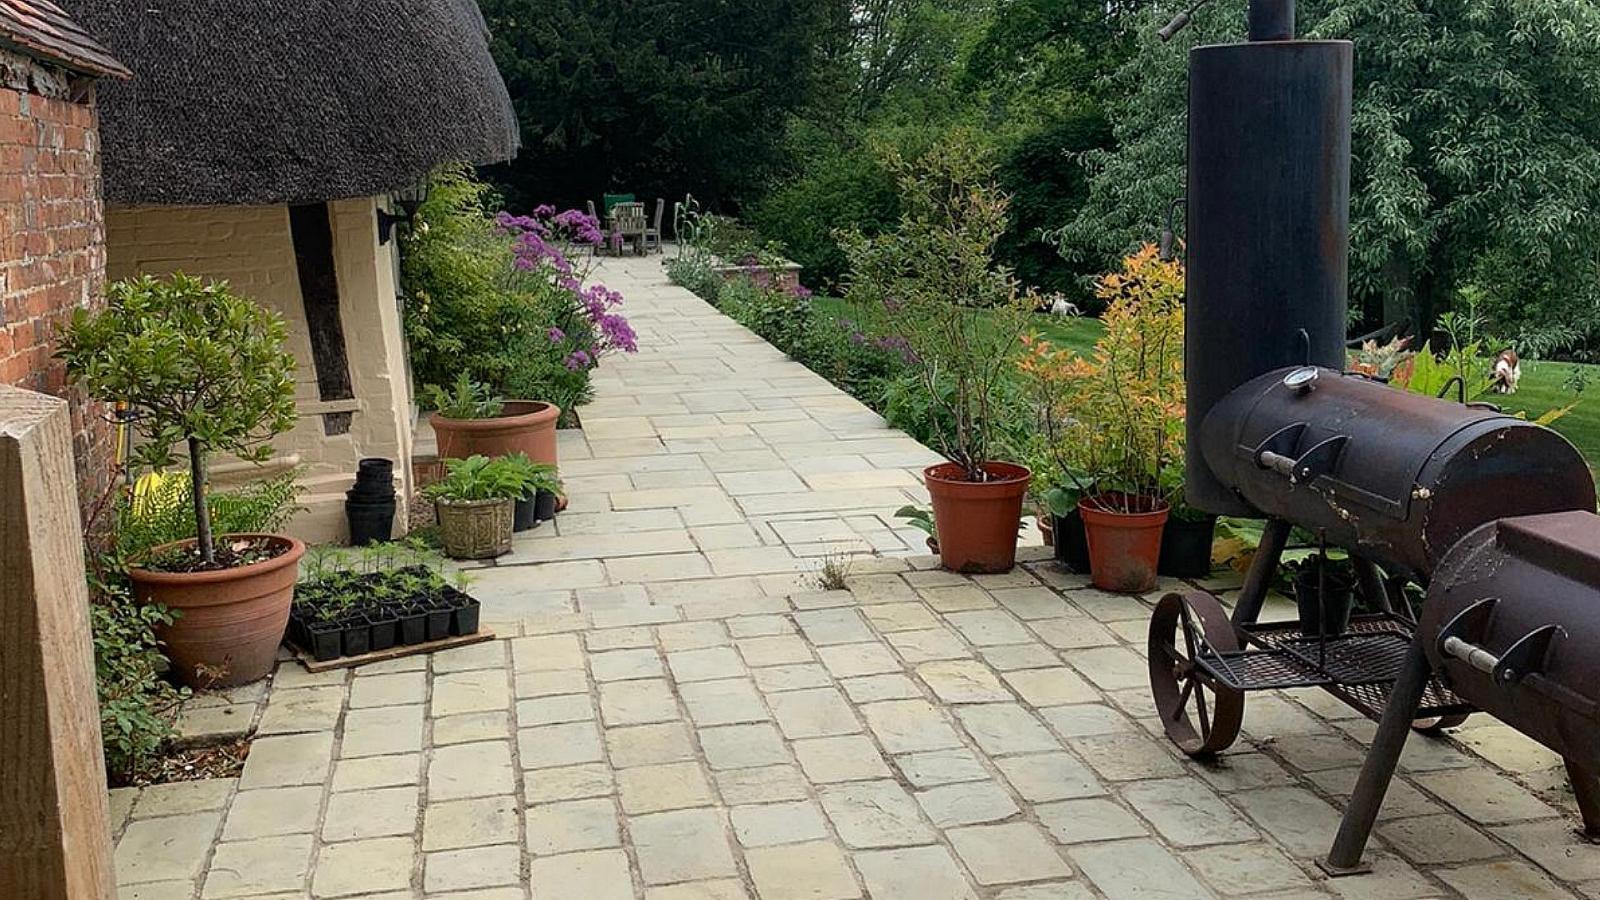 Alison Bockh Garden Design and Landscaping - North Devon -Much deeper patio with beds and potted plants